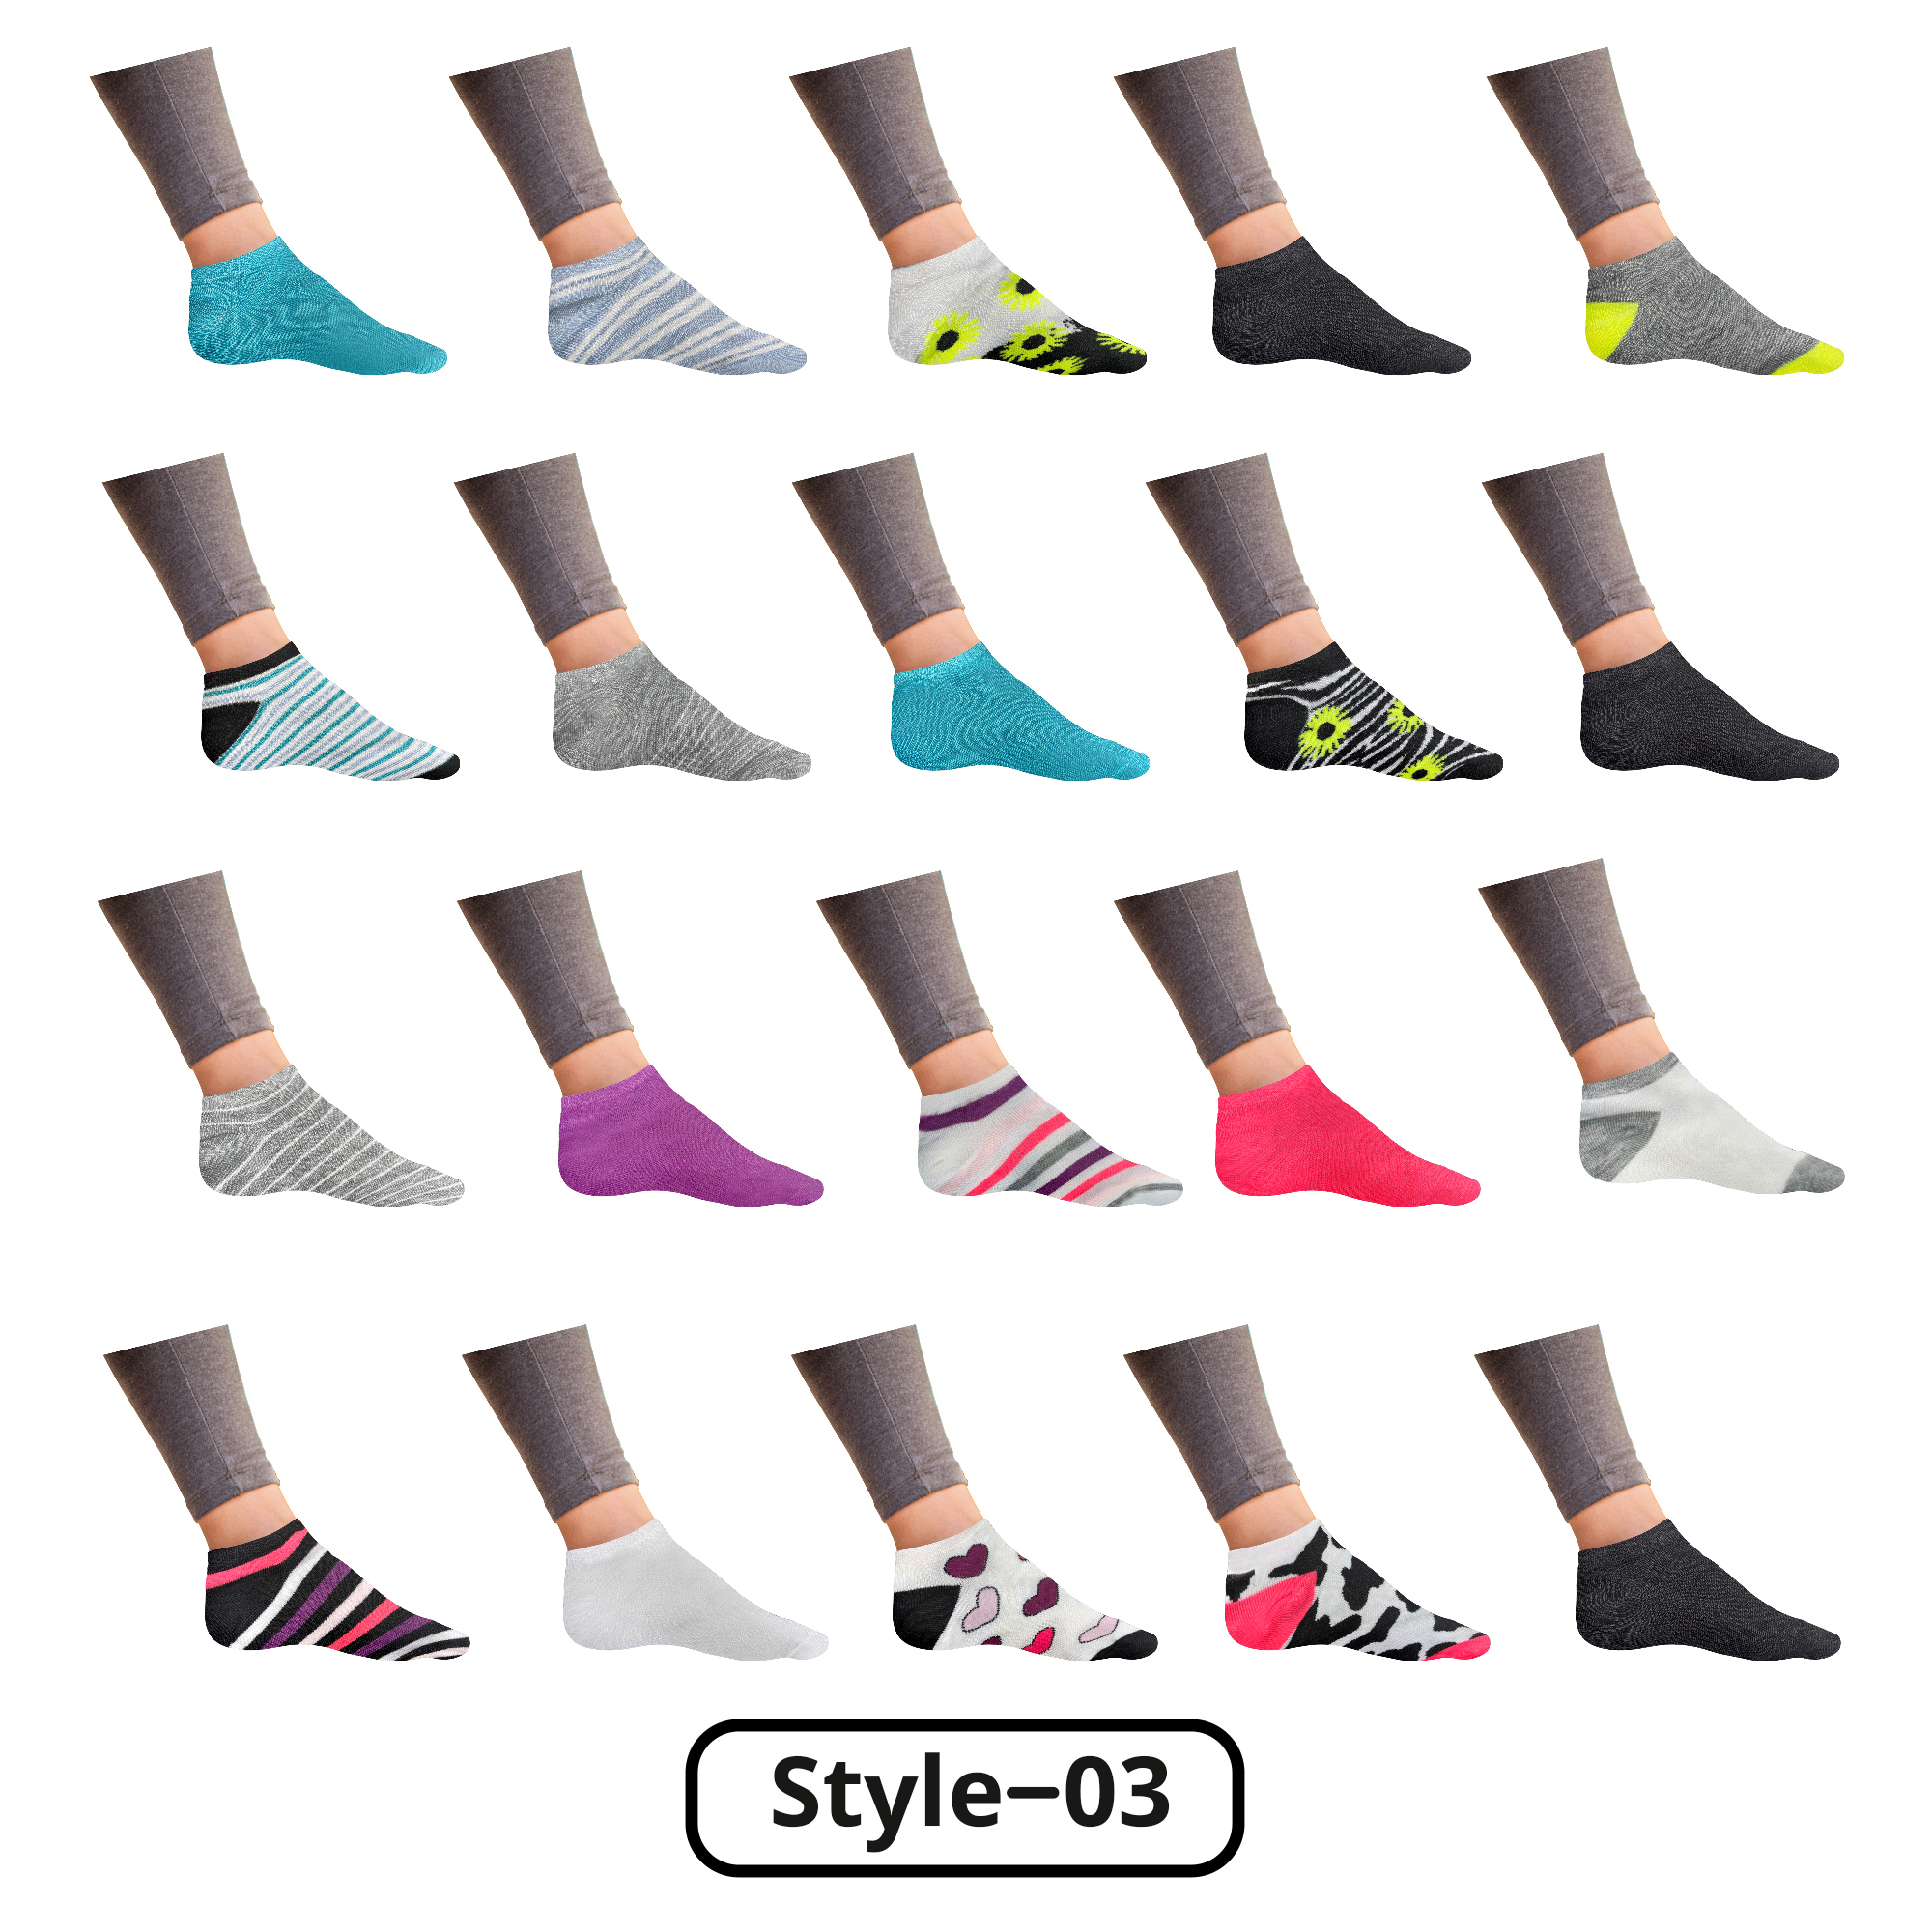 20-Pairs: Women’s Breathable Stylish Colorful Fun No Show Low Cut Ankle Socks - Style 3